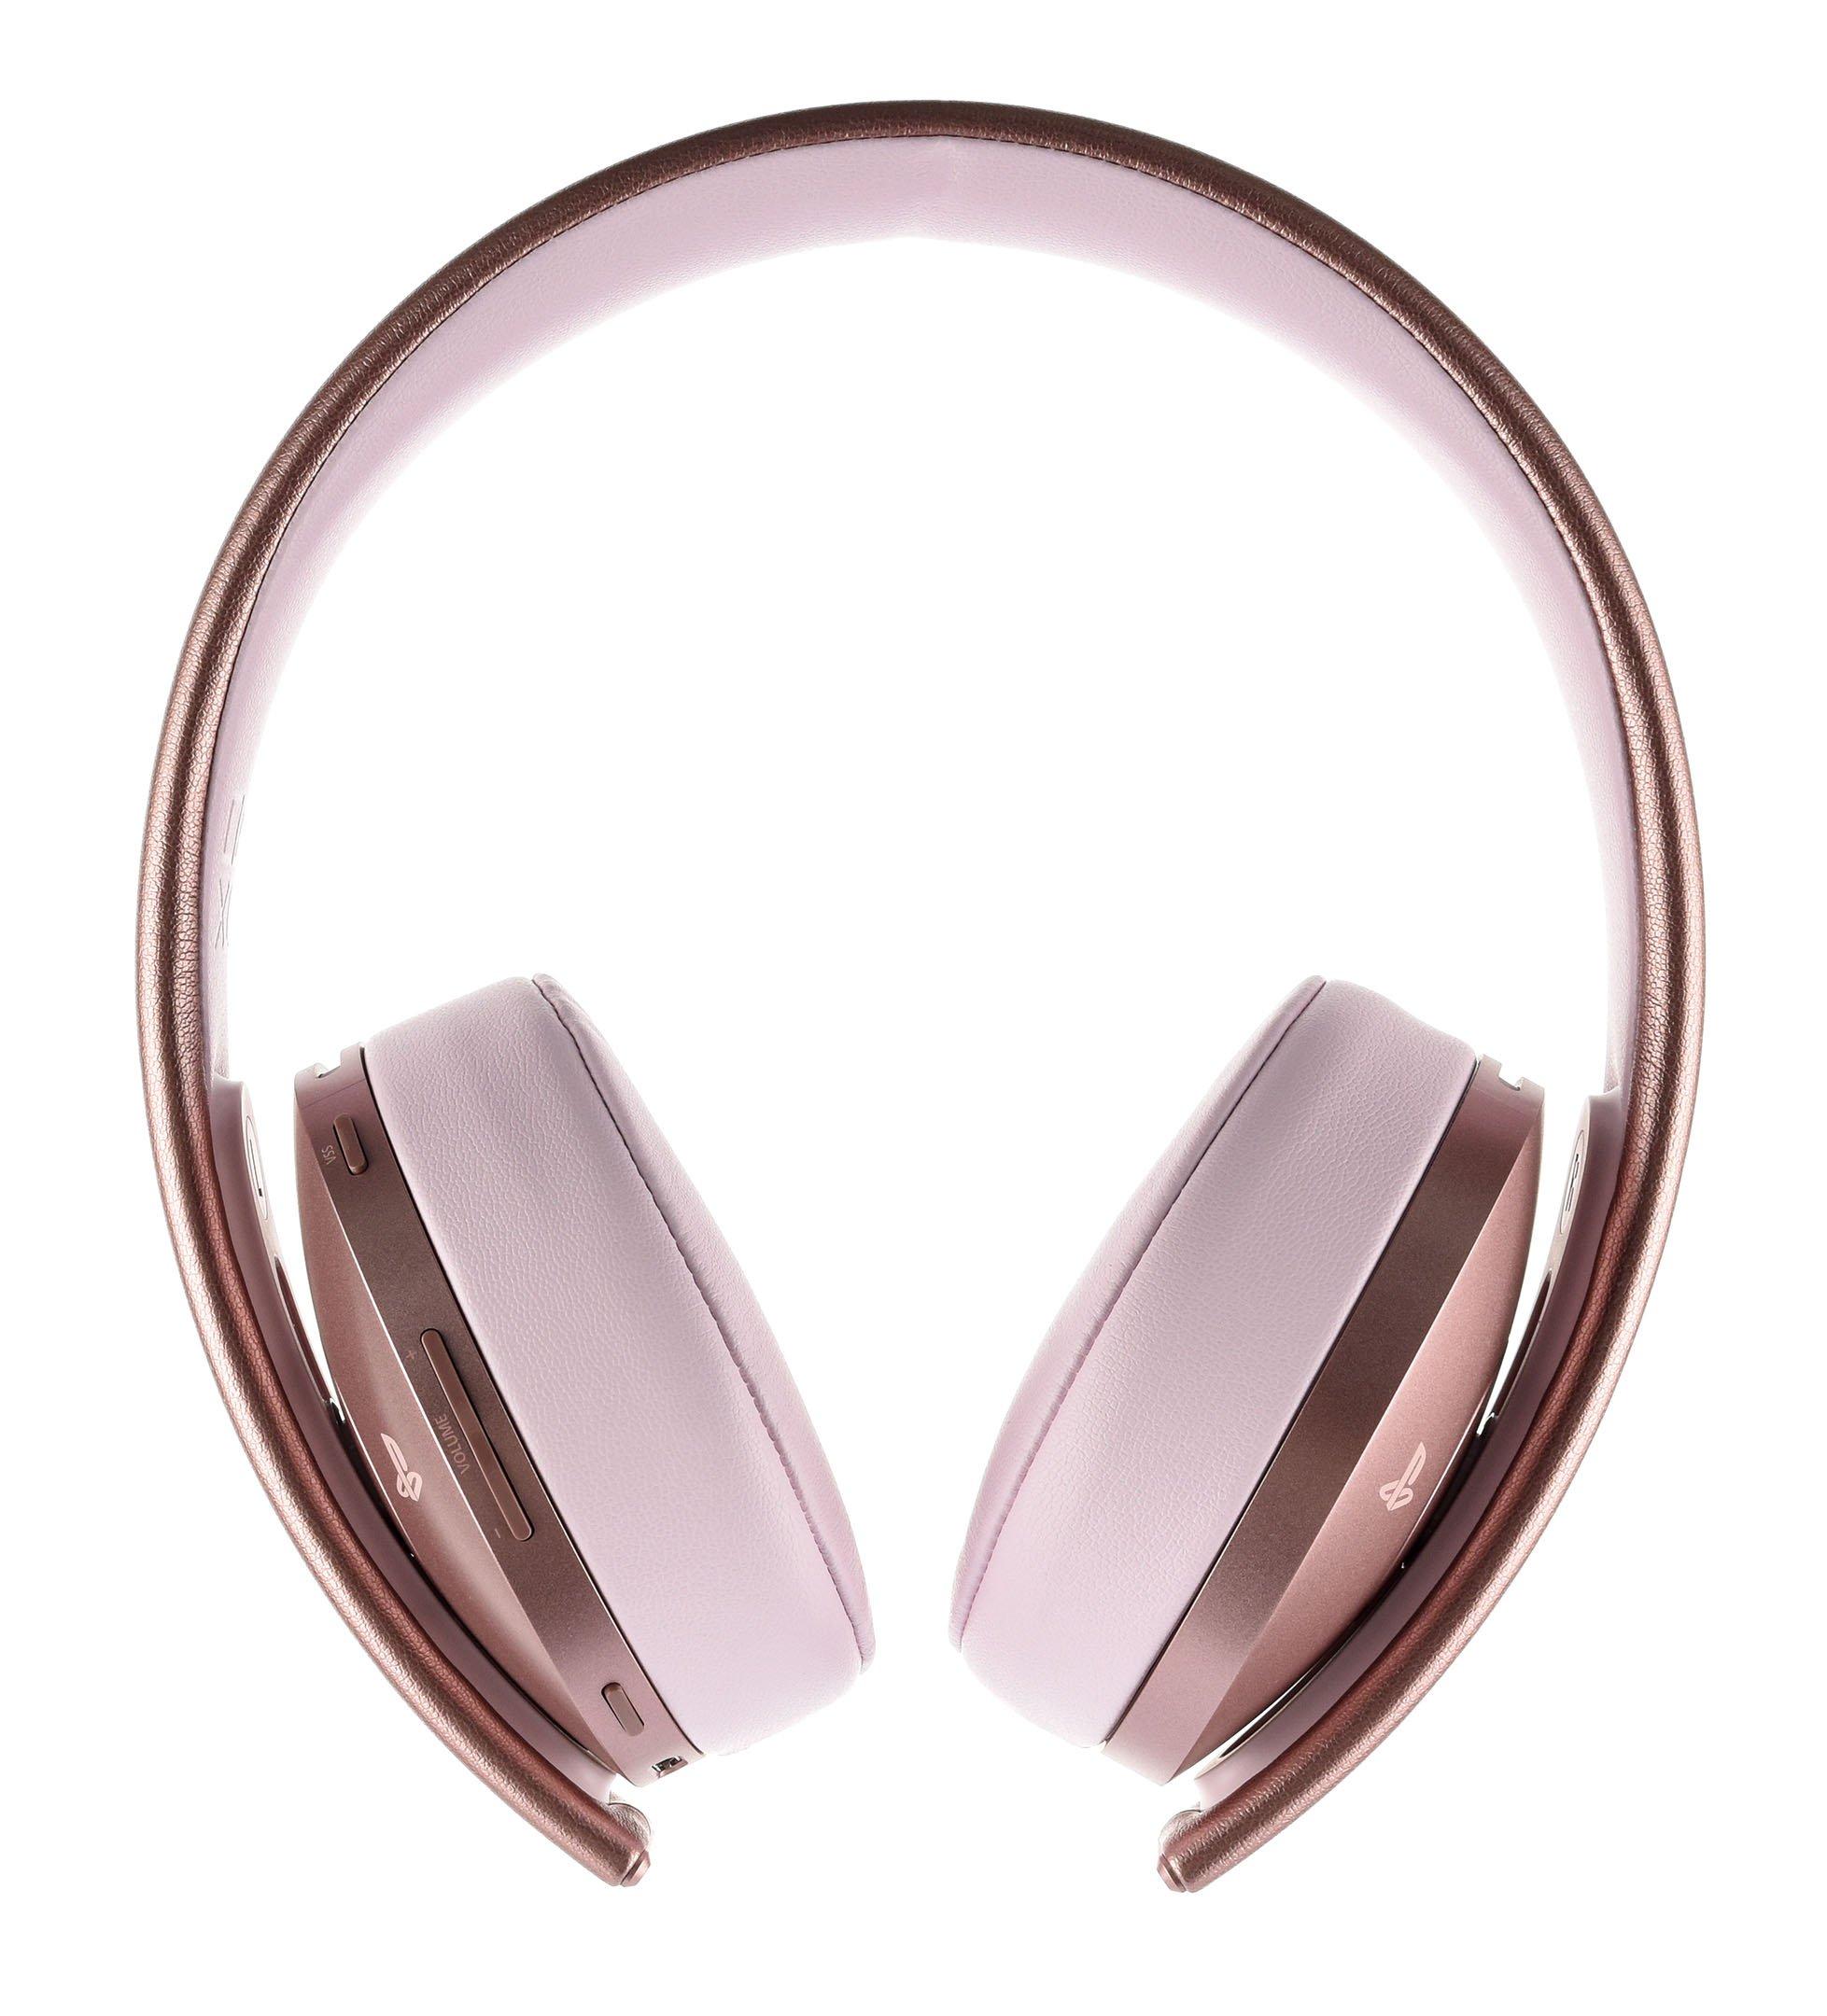 ps4 headset wireless rose gold